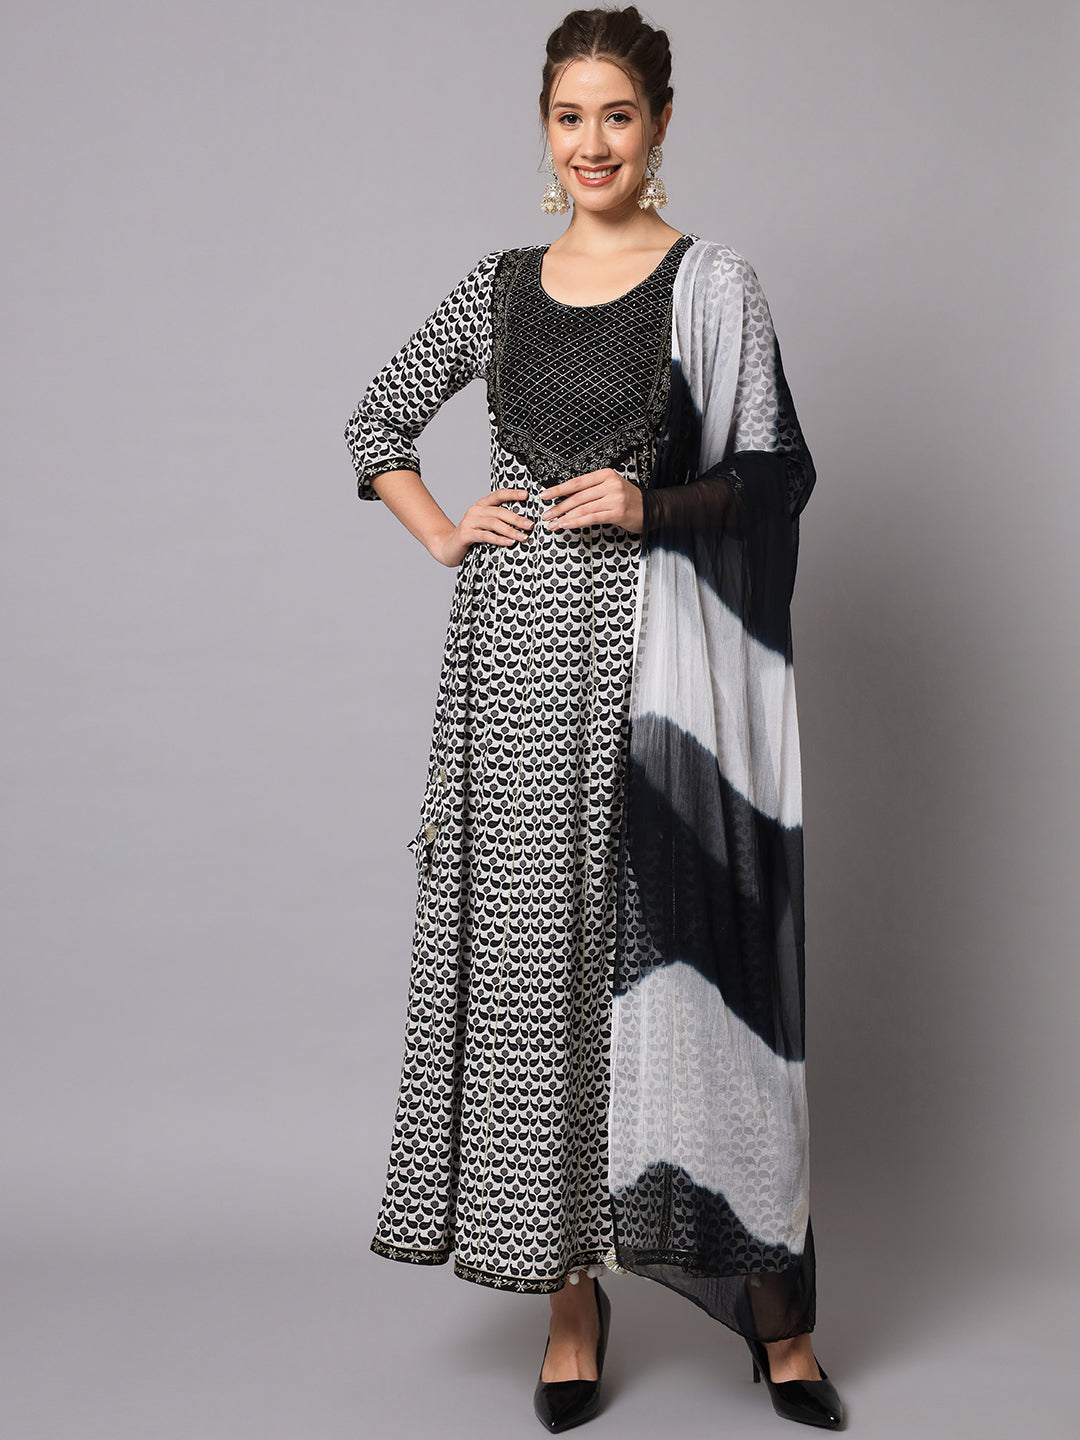 Black and White Dress with Dupatta